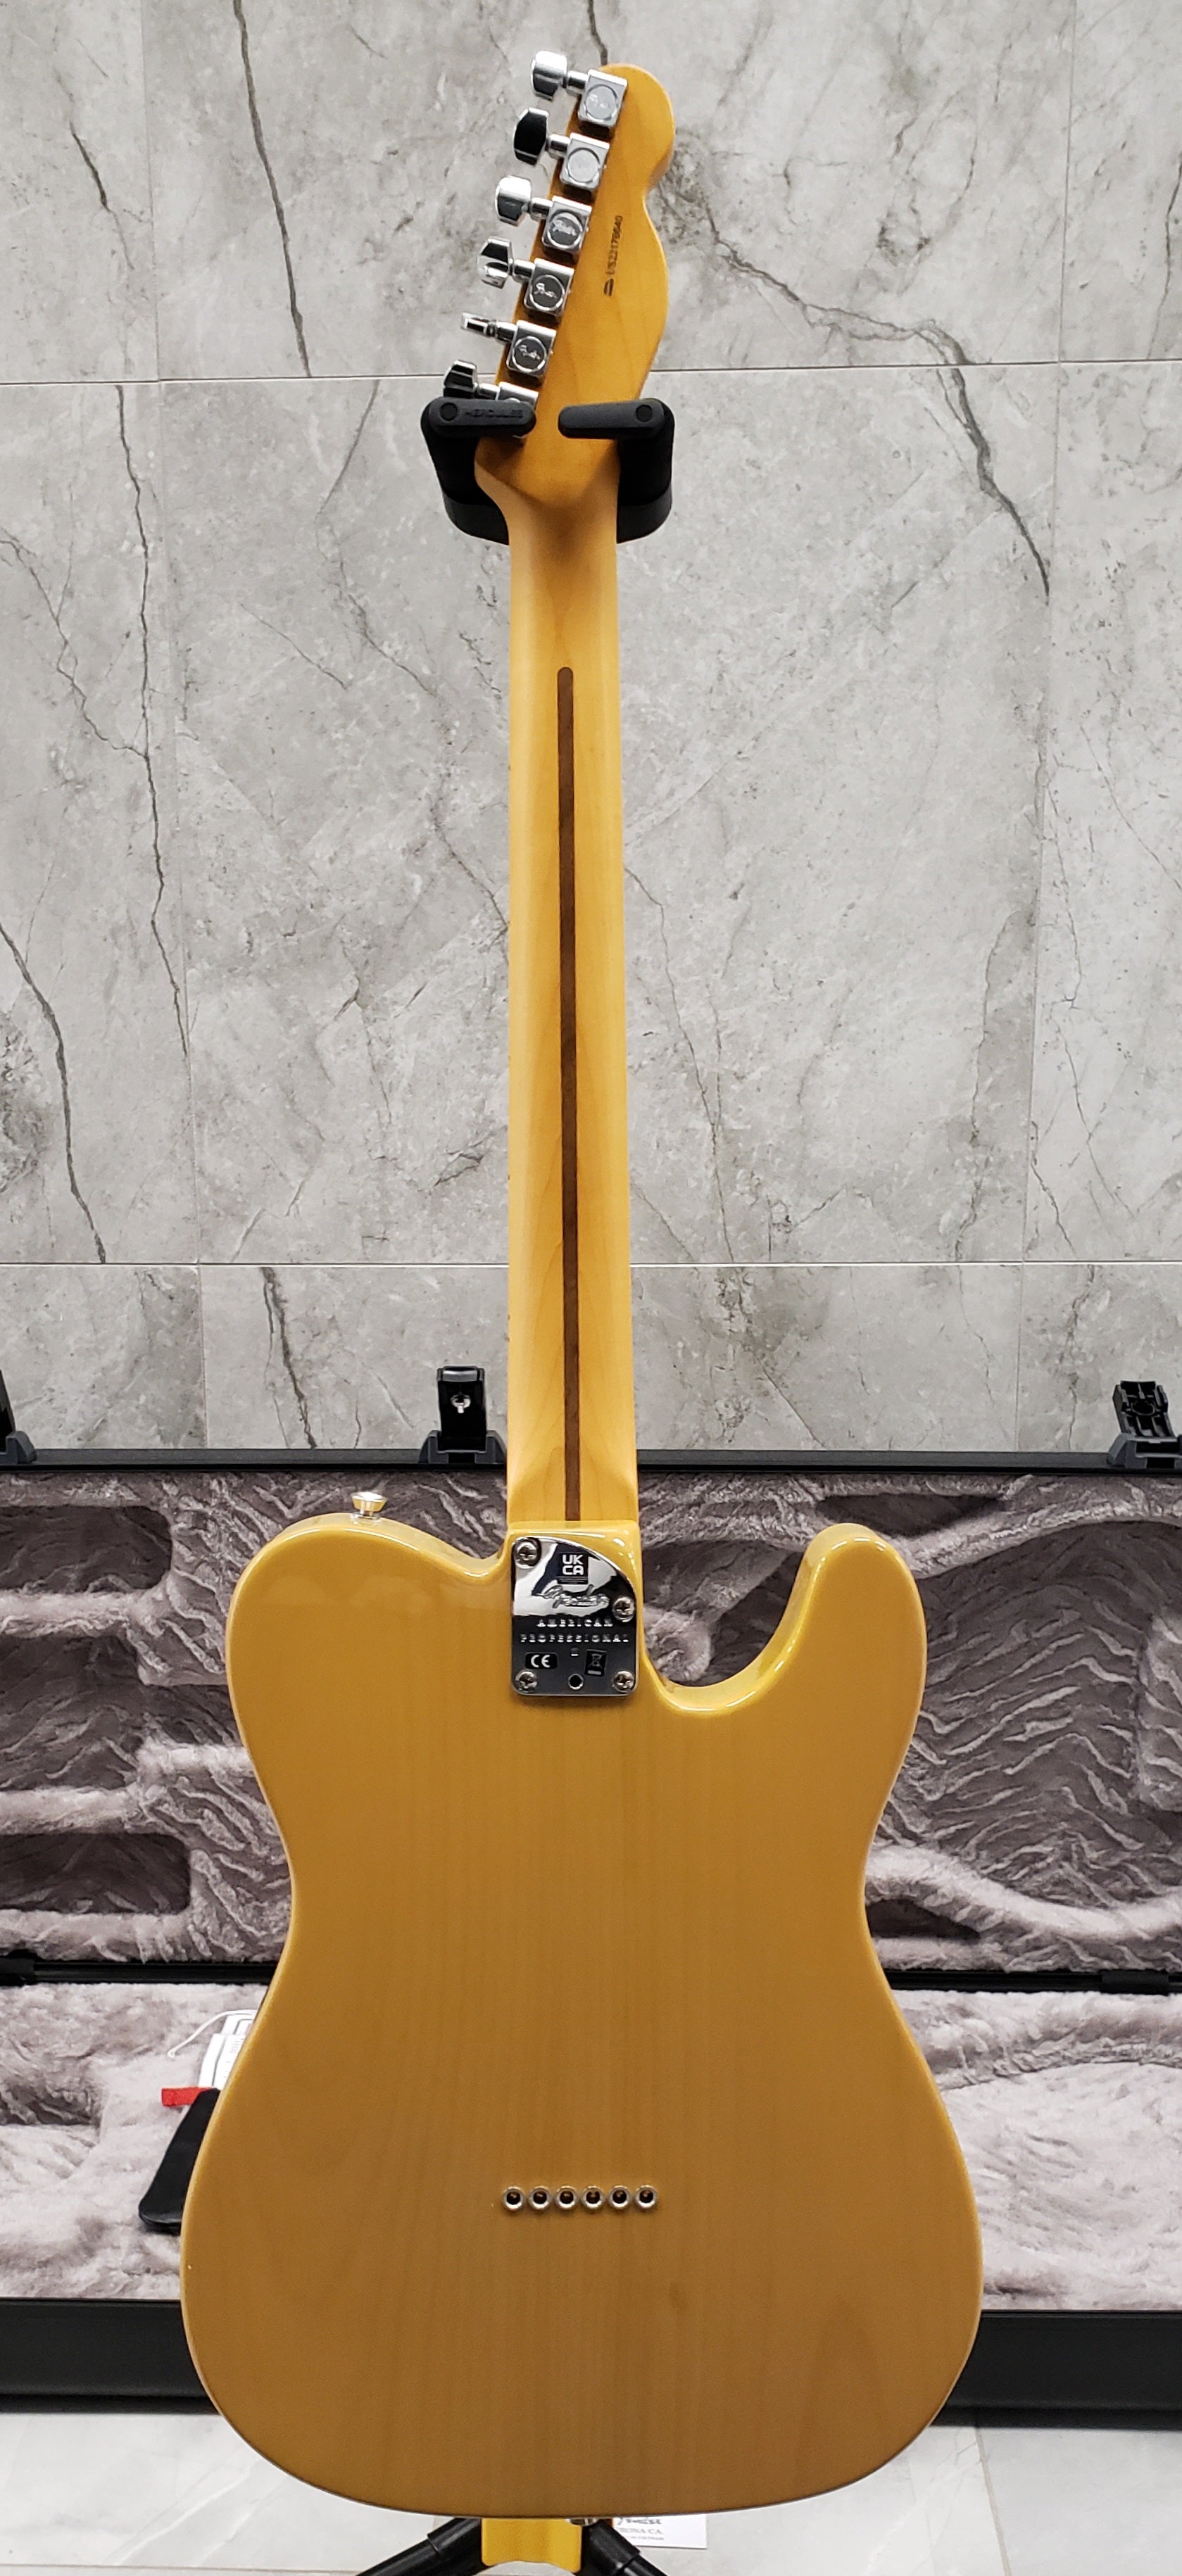 Fender American Professional II Telecaster Left Handed Maple Fingerboard Butterscotch Blonde F-0113952750 SERIAL NUMBER US22176640 - 6.8 LBS